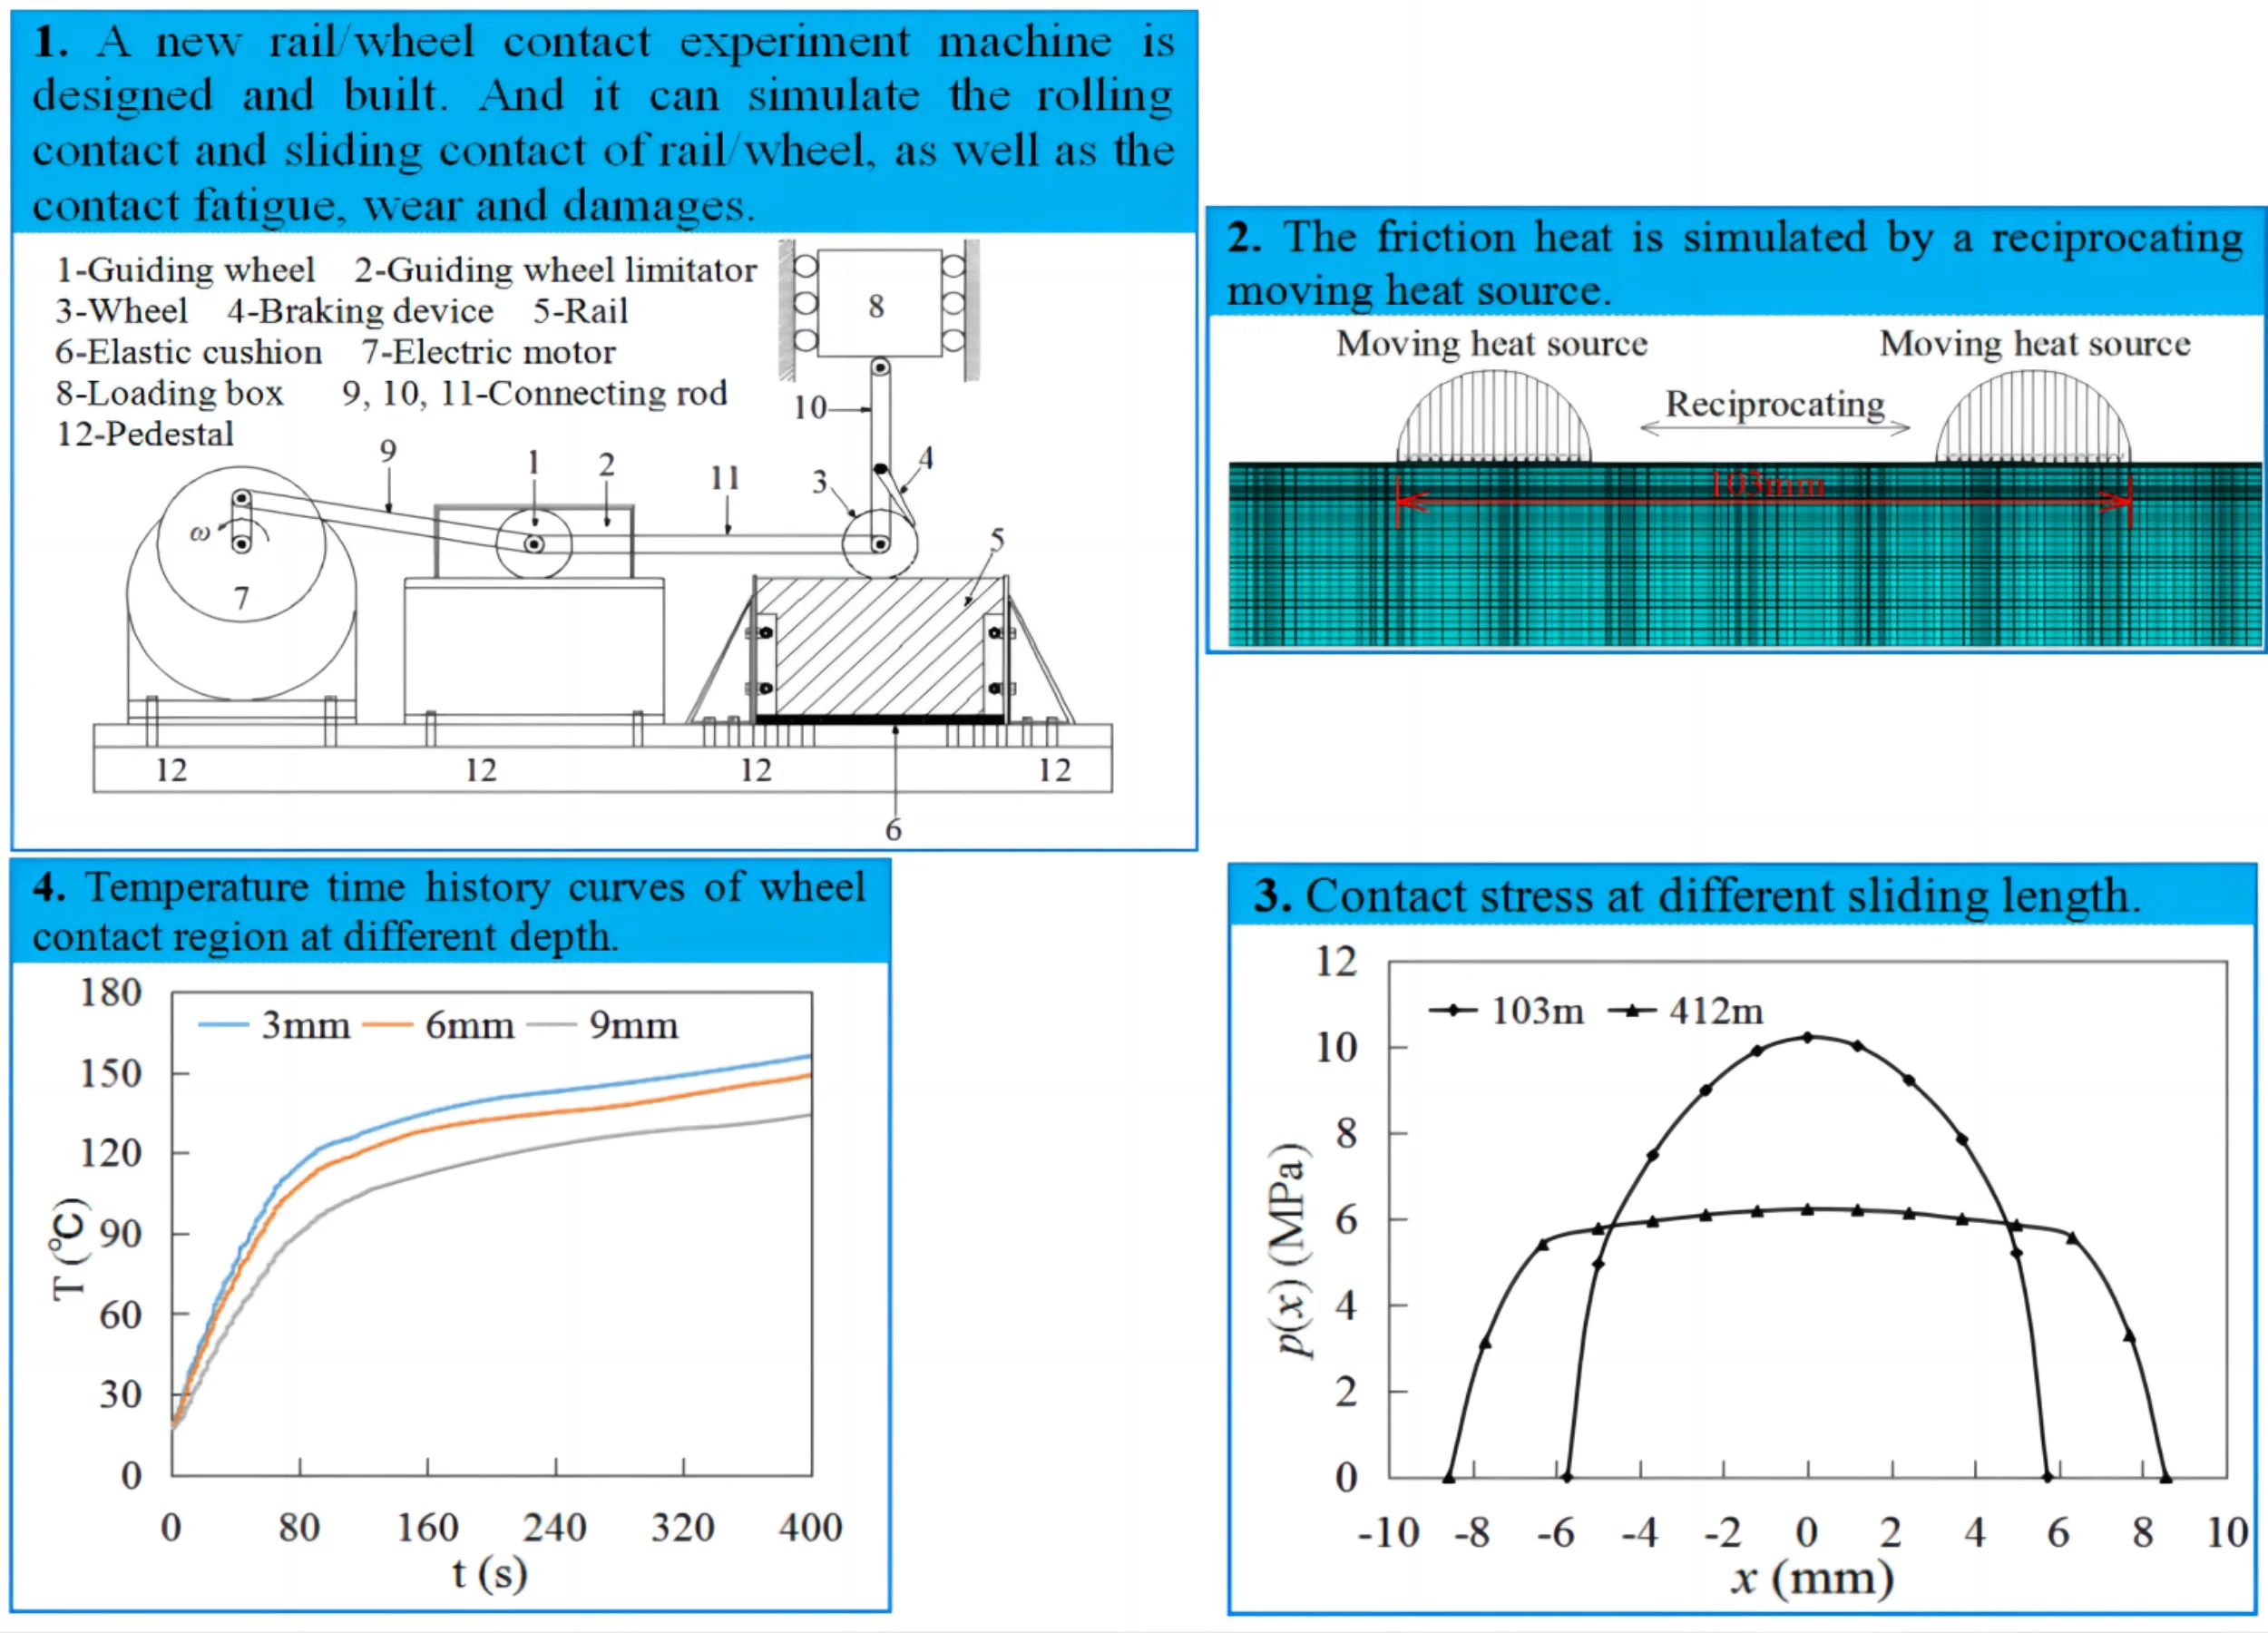 An experimental measurement and numerical calculation method on friction temperature rise of sliding contact pairs - taking rail/wheel contact as an example